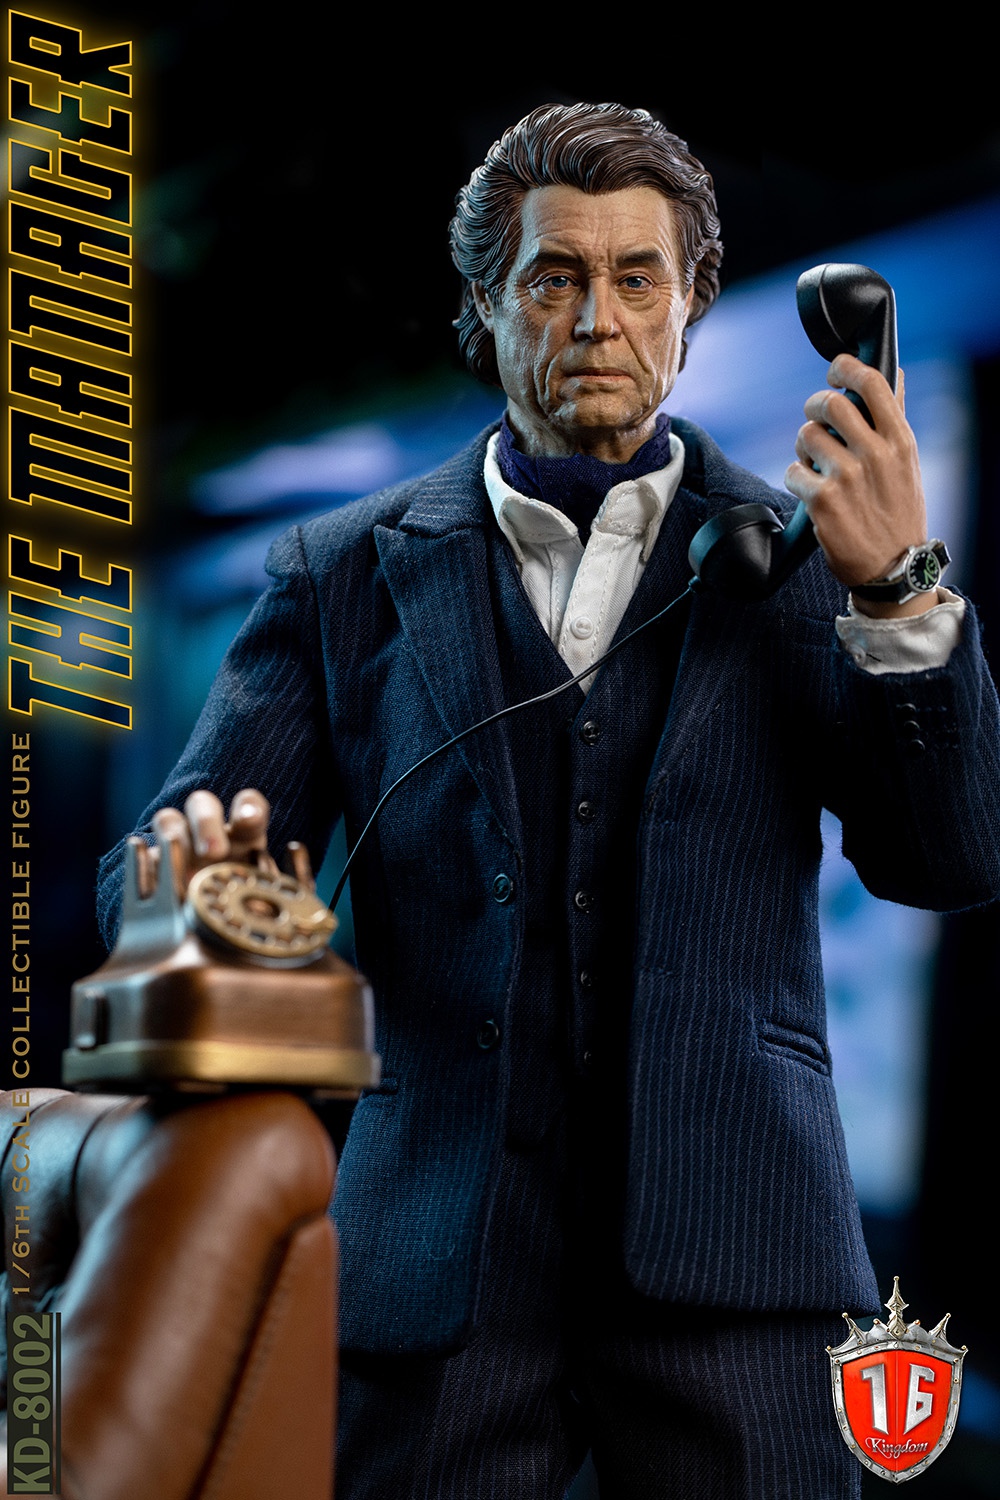 Kingdom - NEW PRODUCT: Kingdom: 1/6 The Manager Winston Action Figure KD-8002 11455410